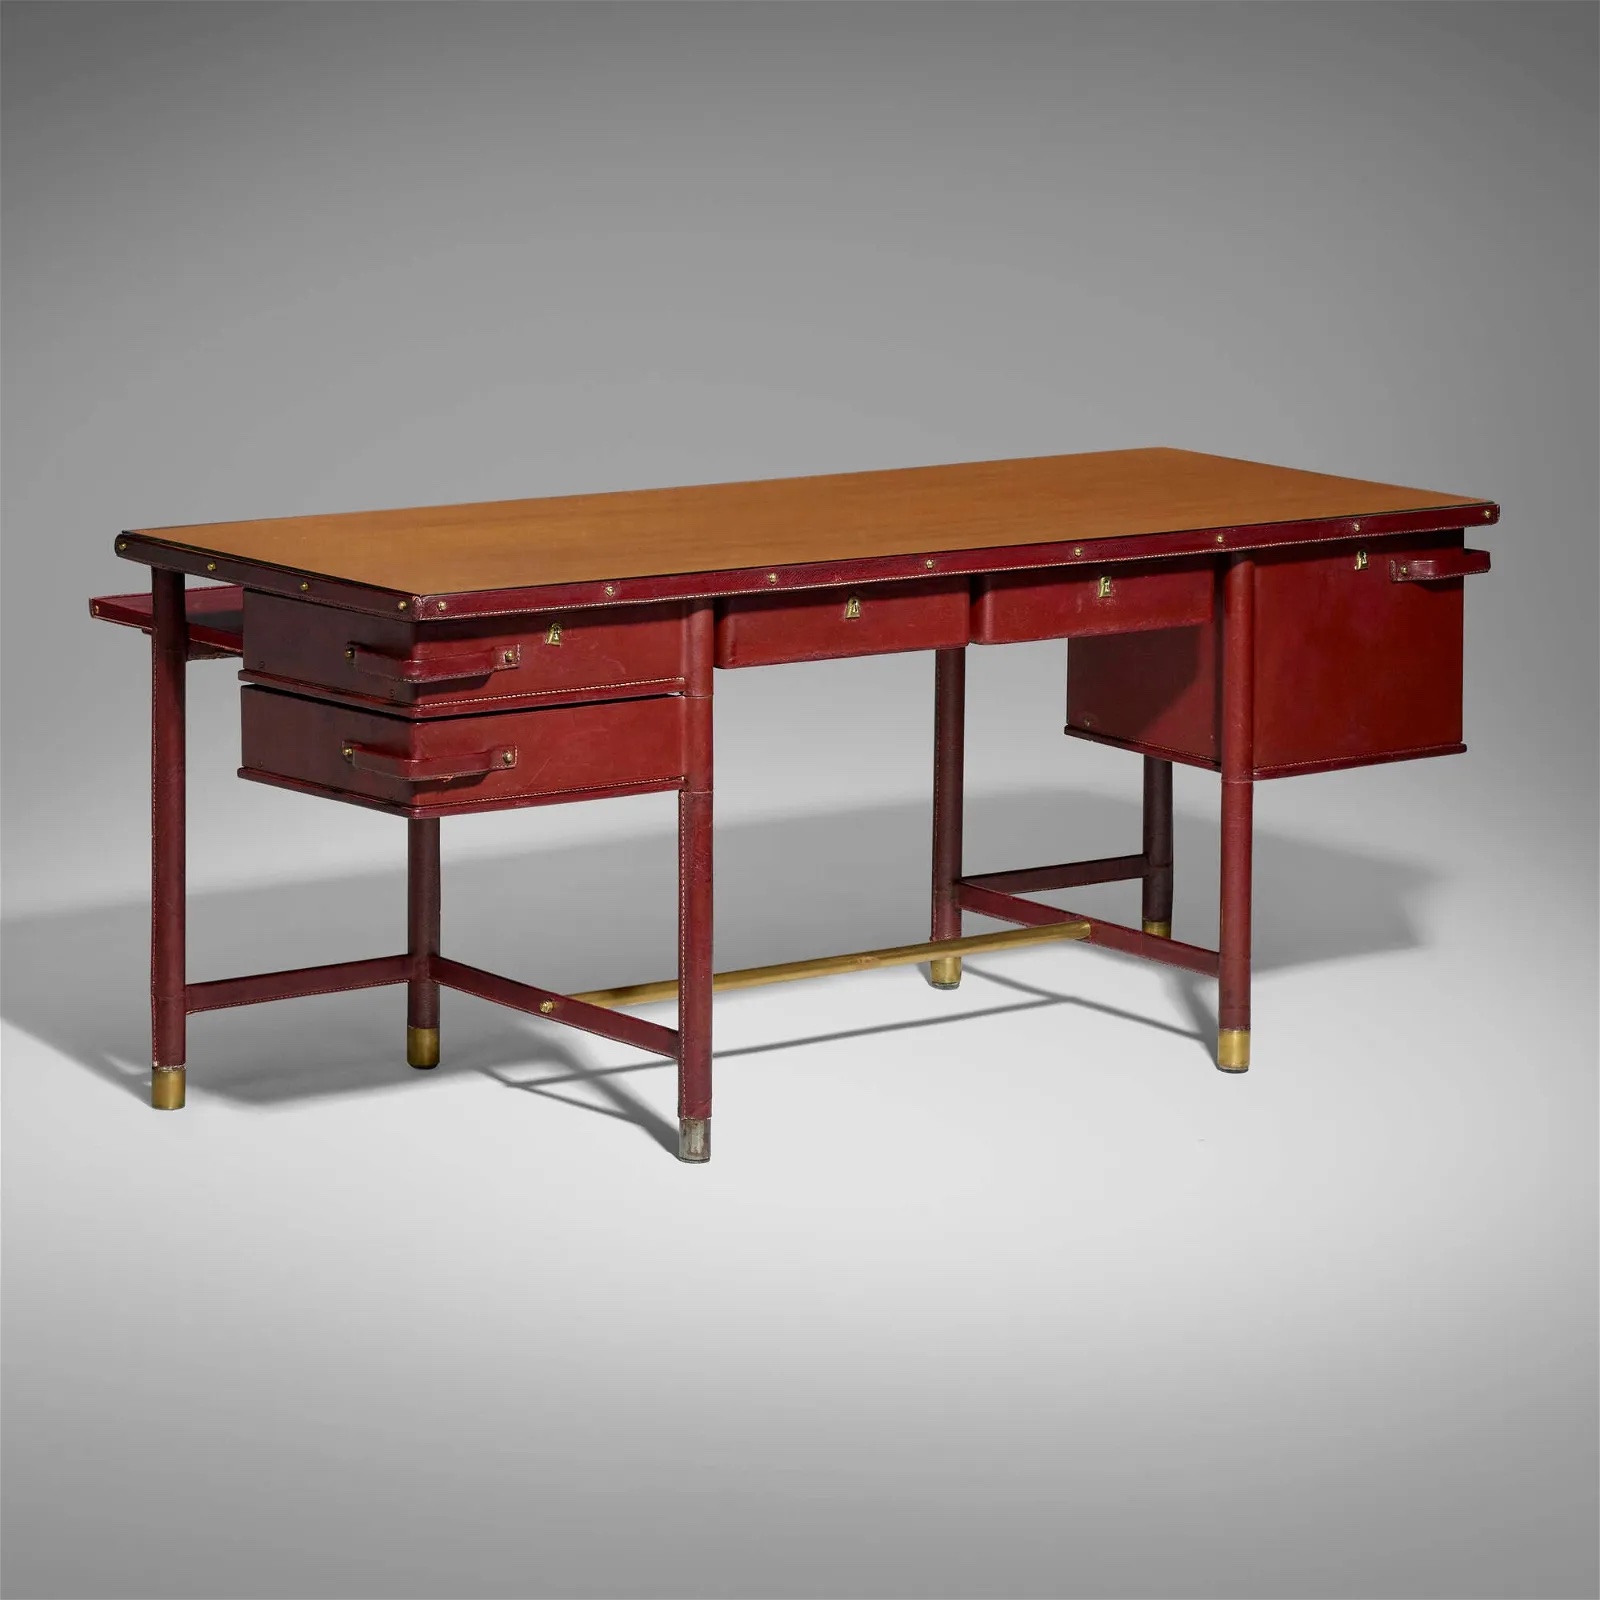 Jacques Quinet, President desk, which sold for $30,000 ($39,300 with buyer’s premium) at LAMA.